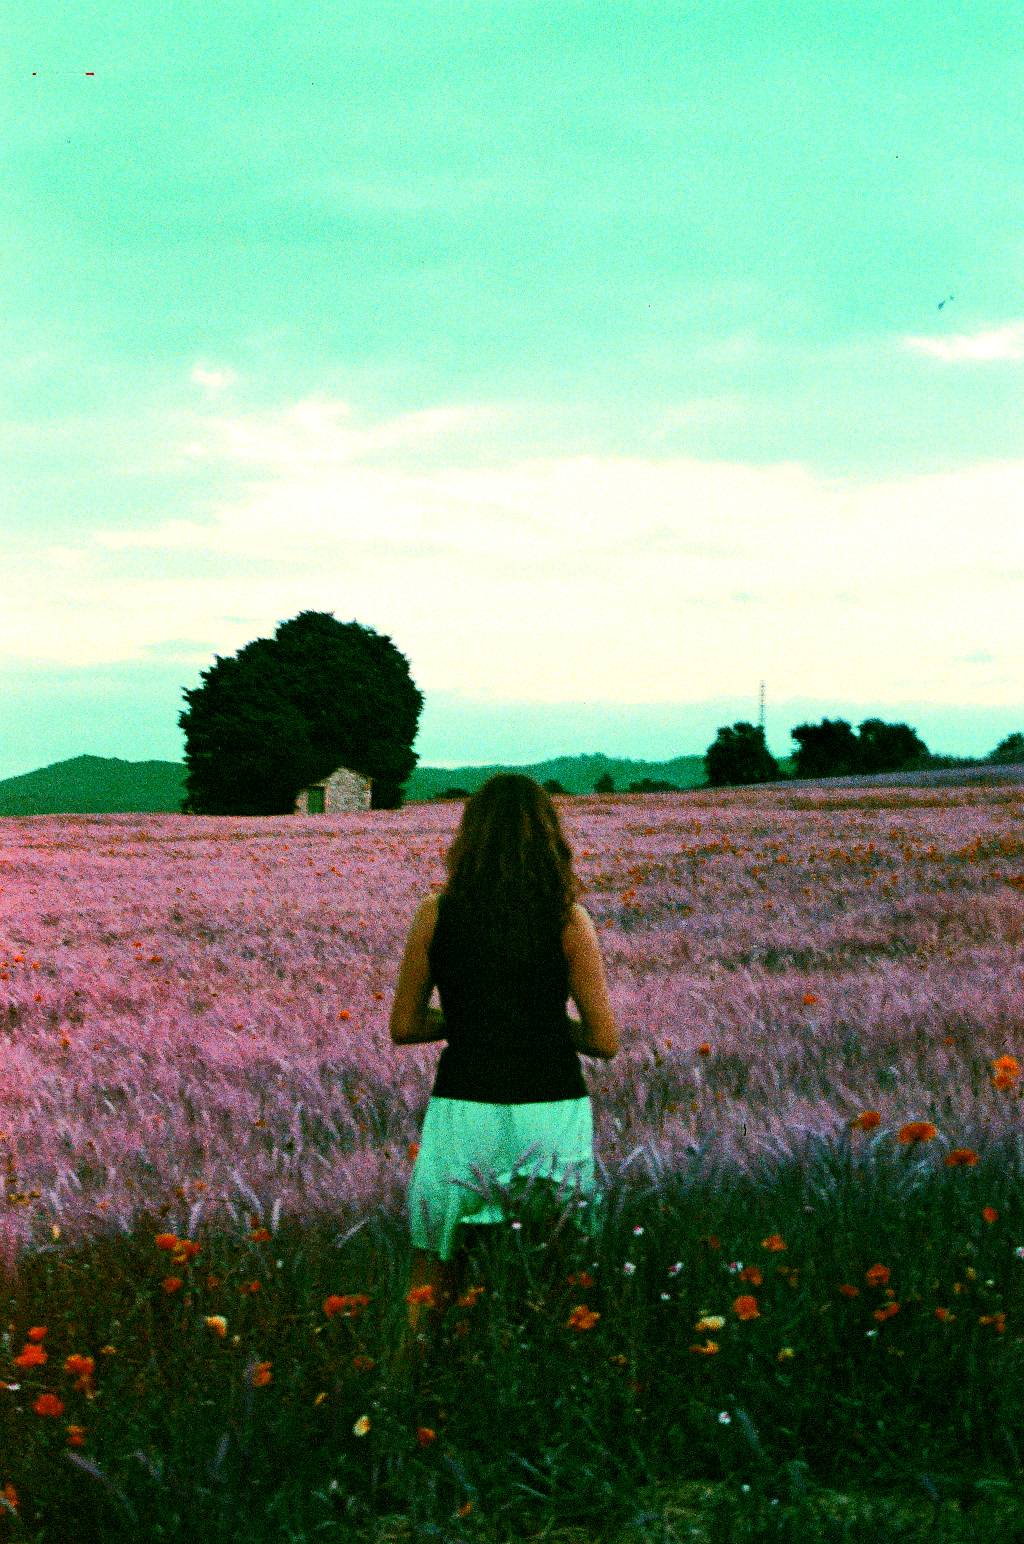 Nataly Muñoz’s Surreal World with the LomoChrome Purple